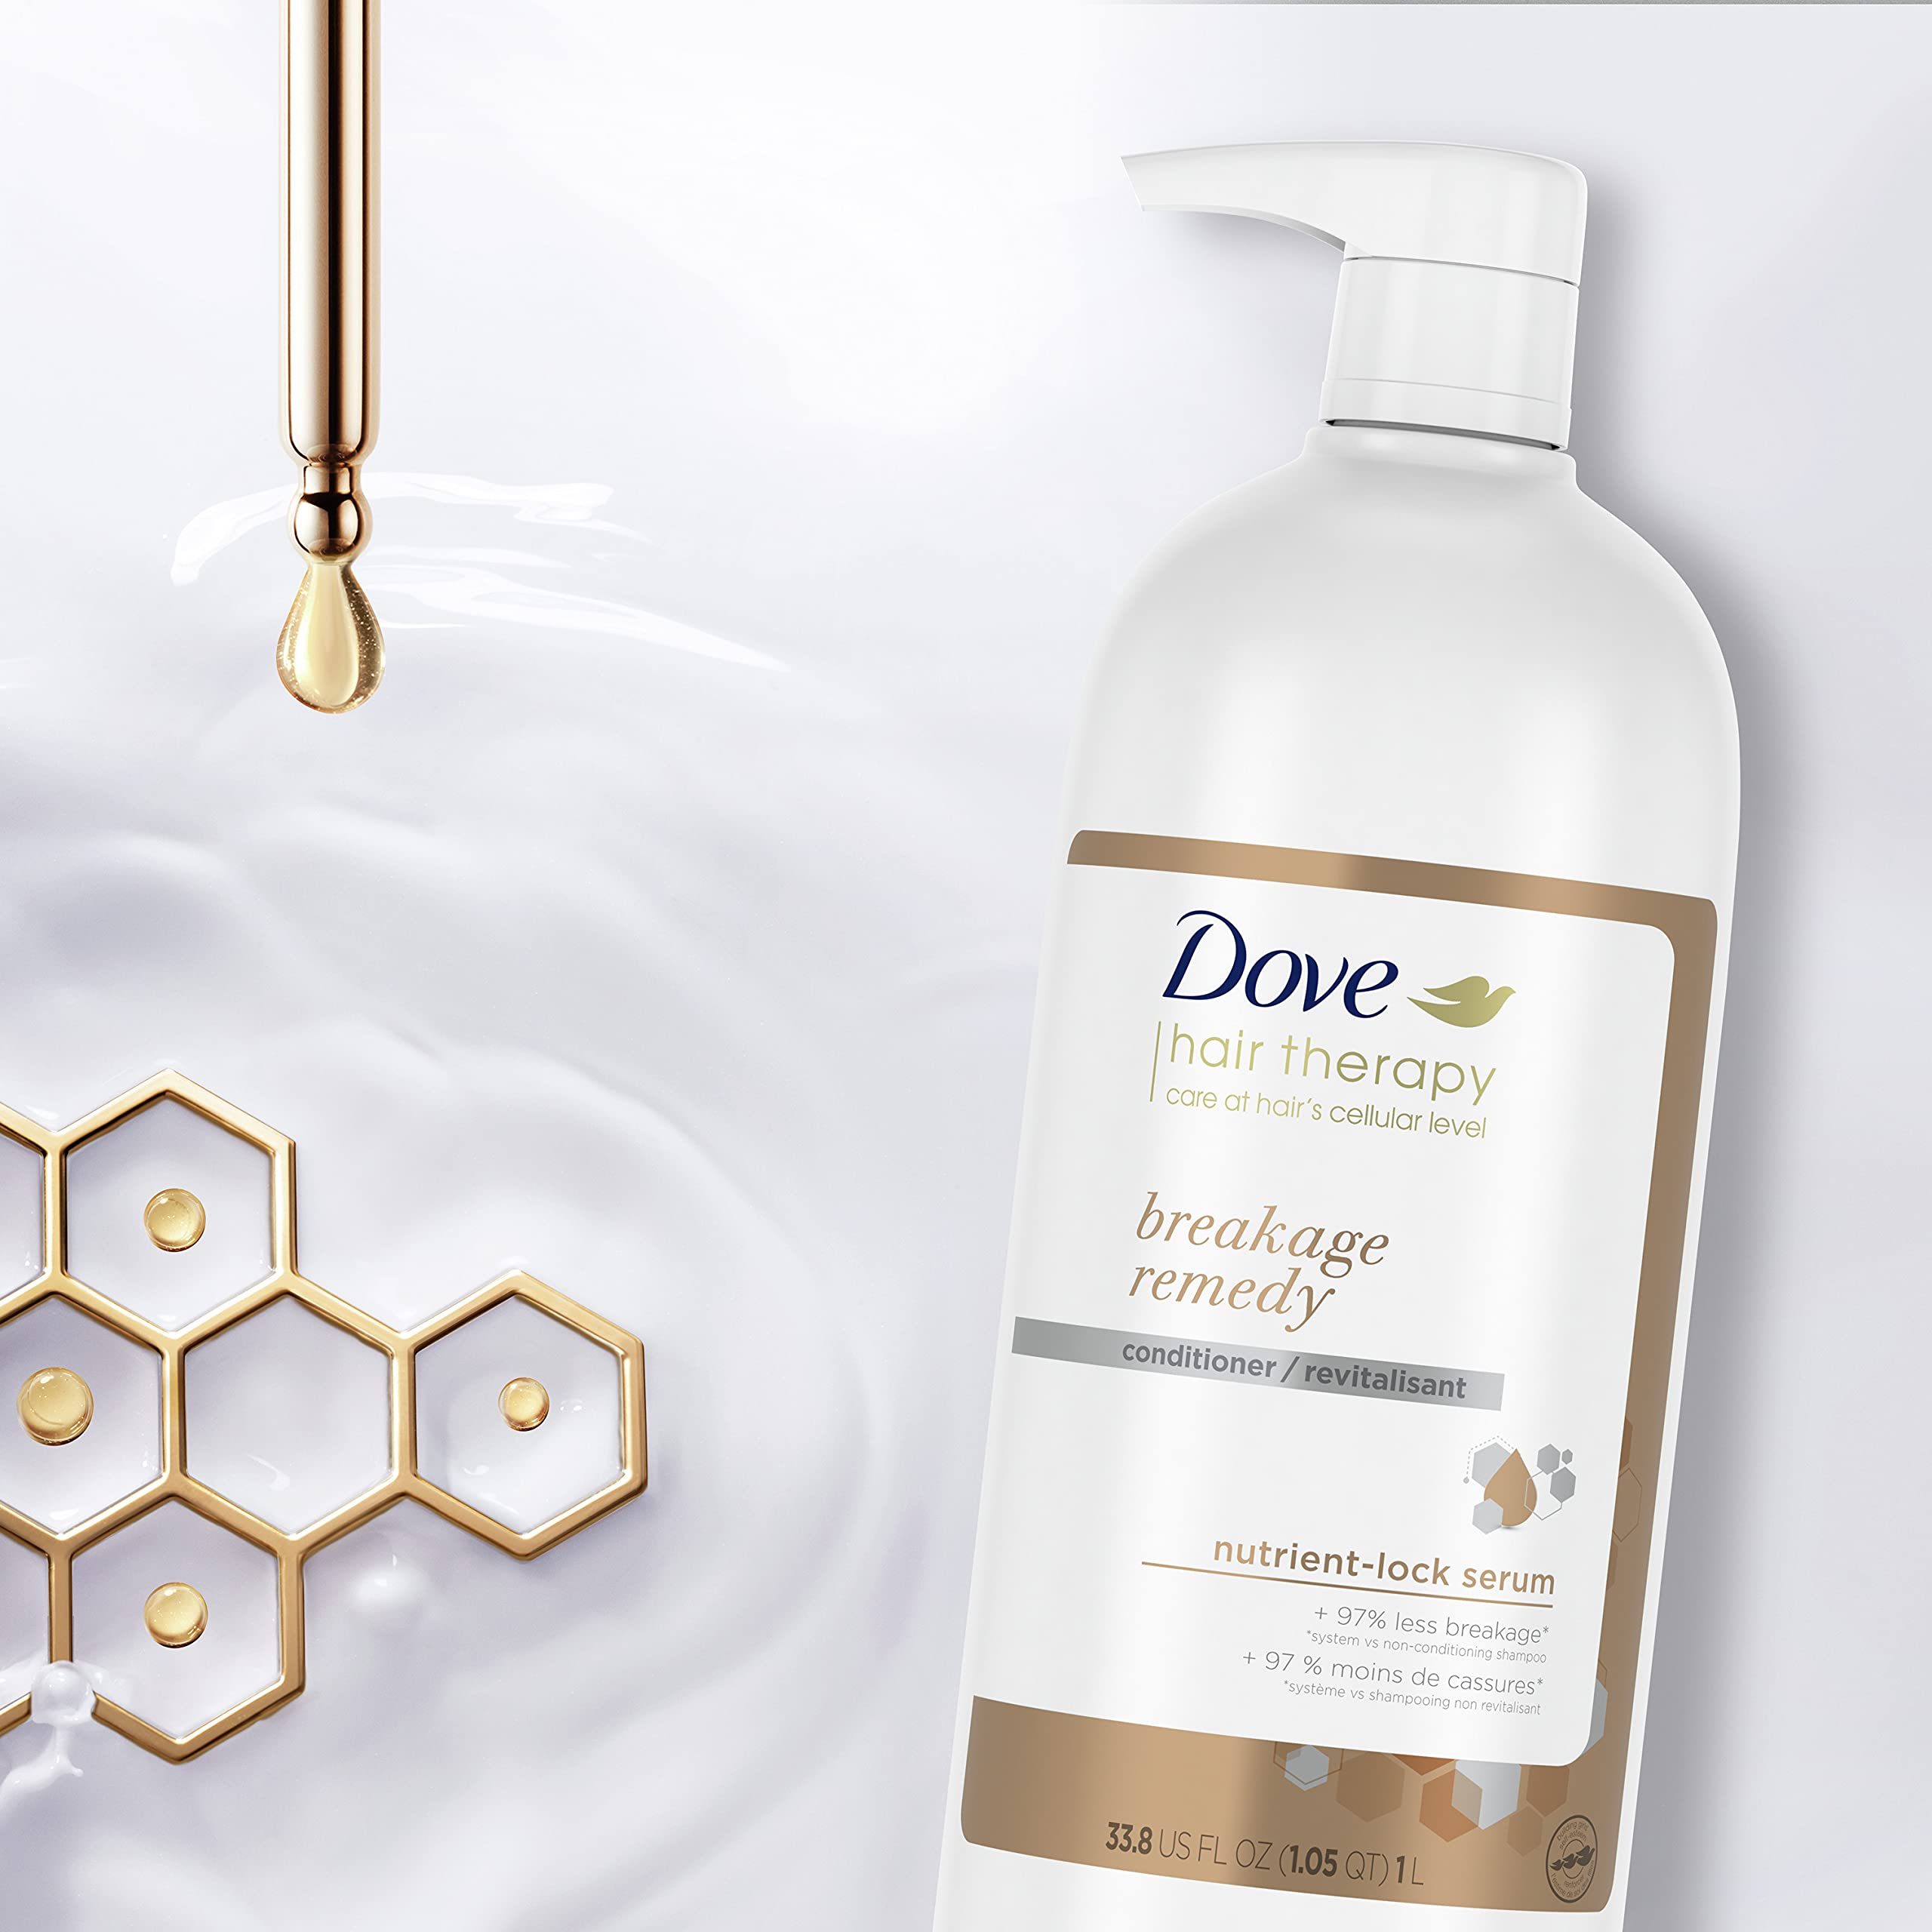 Dove Hair Therapy Conditioner Breakage Remedy for Damaged Hair Hair Conditioner with Nutrient-Lock Serum 33.8 oz